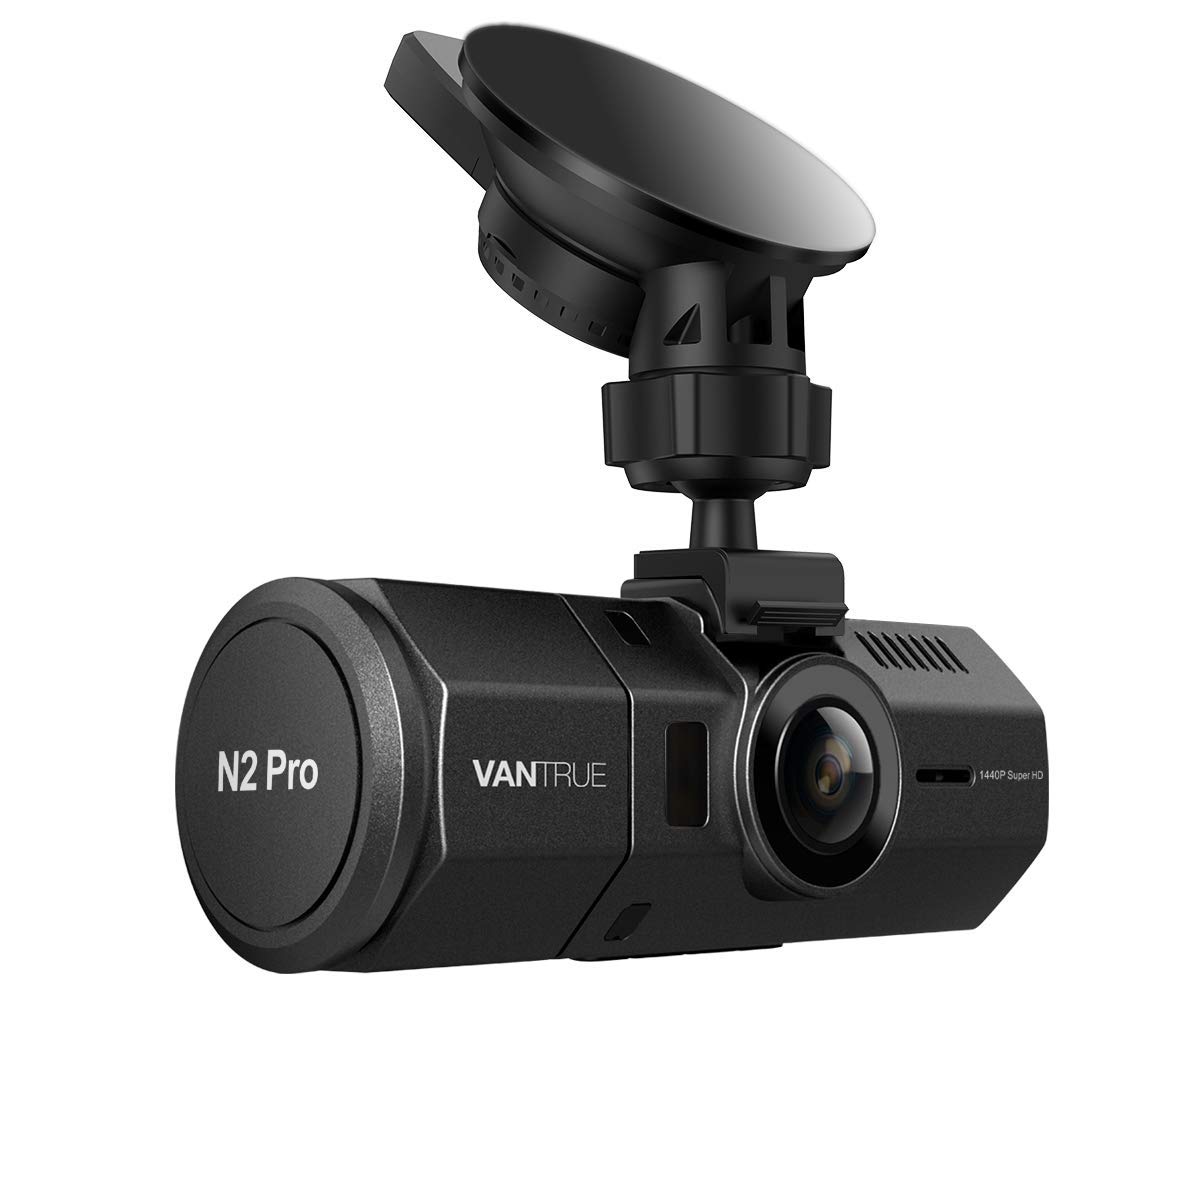 best dash cams of 2021